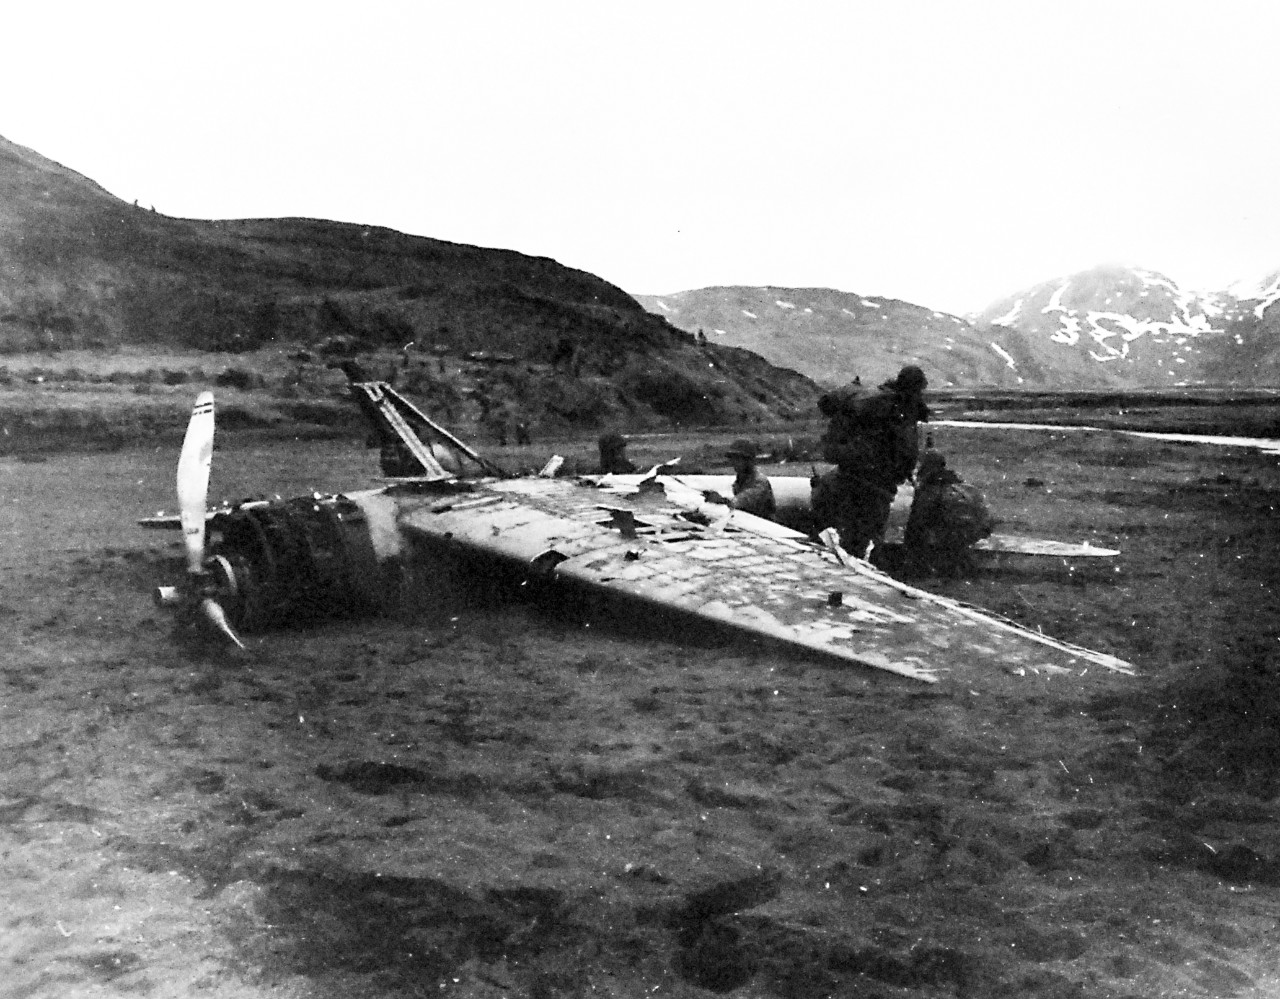 80-G-51010:    Aleutian Islands Campaign, June 1942 - August 1943.  Battle for Attu, May 1943.    U.S. Occupation of Attu, Aleutian Islands.  Japanese Zero, A6M-3N, plane damaged by American fire on Black Beach, Heltz Bay. May 17, 1943.     U.S. Navy Photograph, now in the collections of the National Archives.  (2016/05/10).